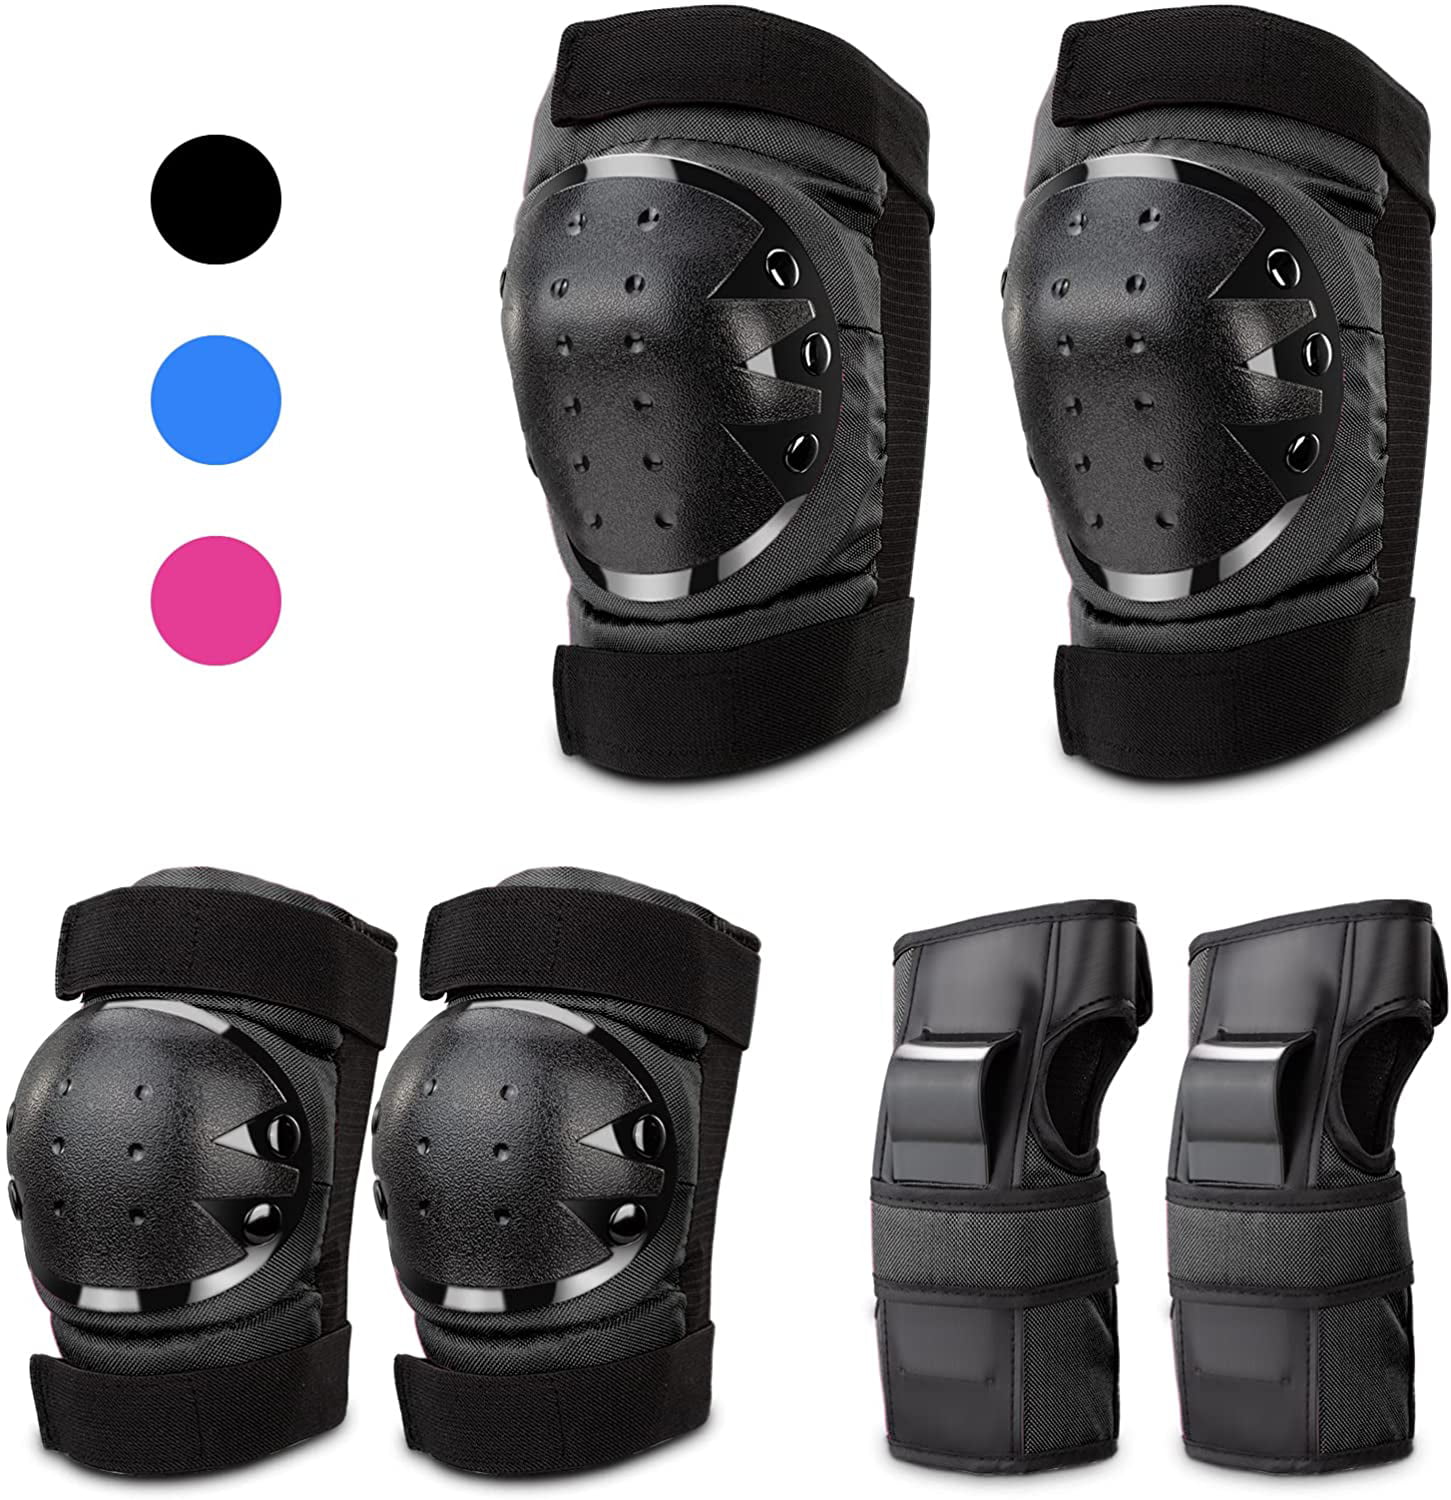 Cycling,Skateboard. Inline Skatings IPSXP Kids/Youth Knee Pad Elbow Pad Guard Protective Gear Set for Roller Skates 